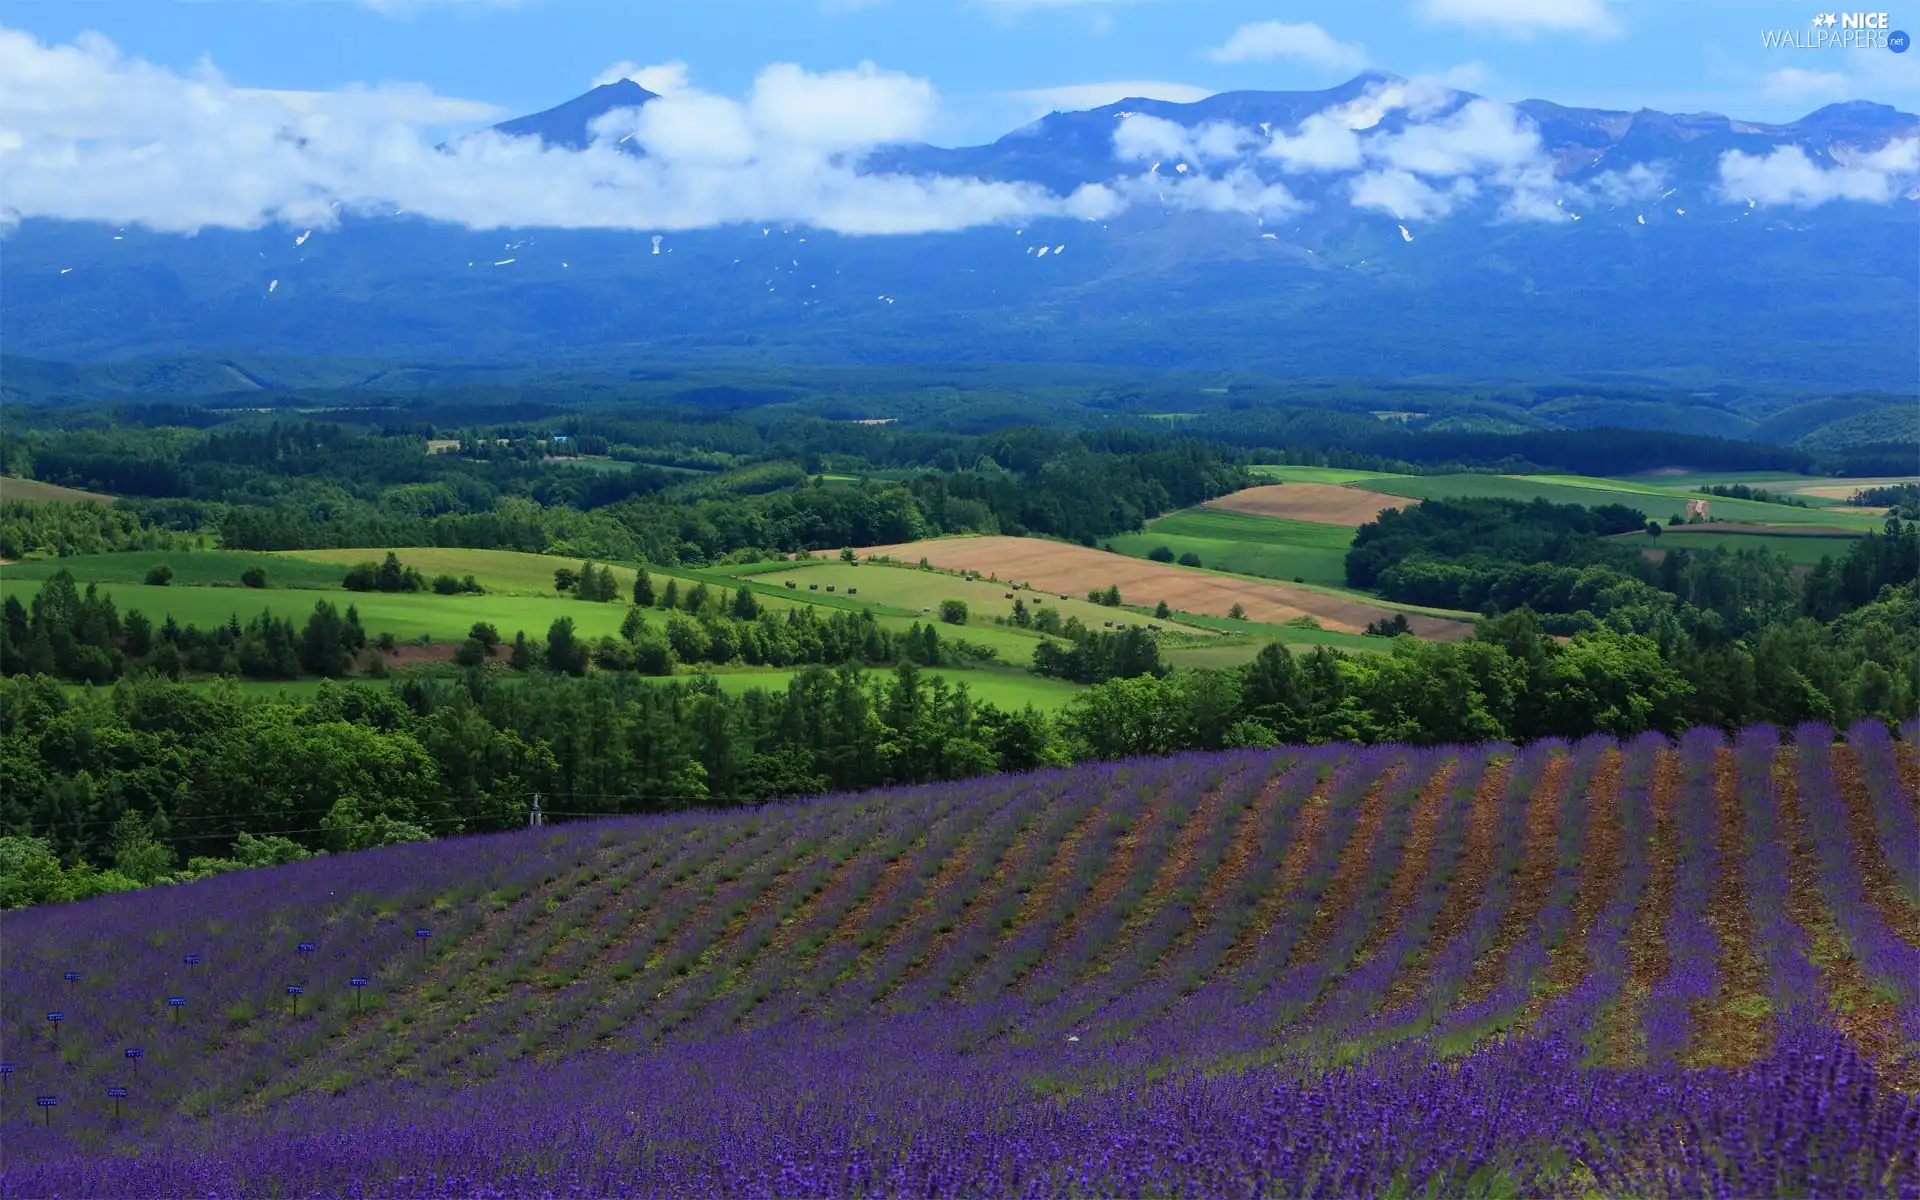 viewes, Mountains, lavender, clouds, Field, trees